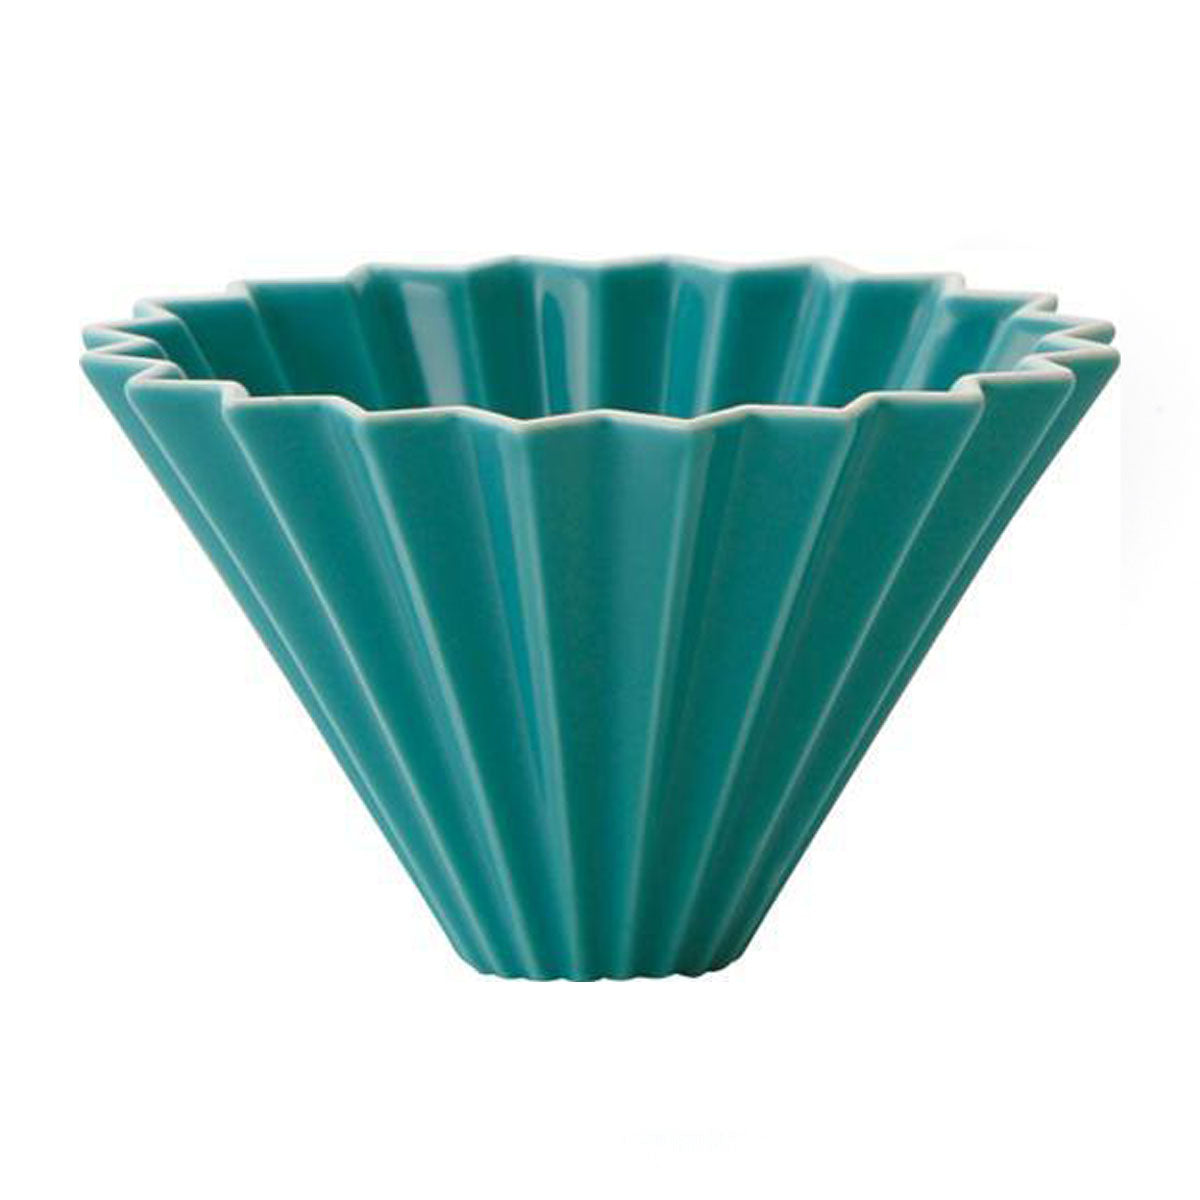 TURQUOISE ORIGAMI COFFEE DRIPPER, MADE IN JAPAN WITH MINO PORCELAIN.